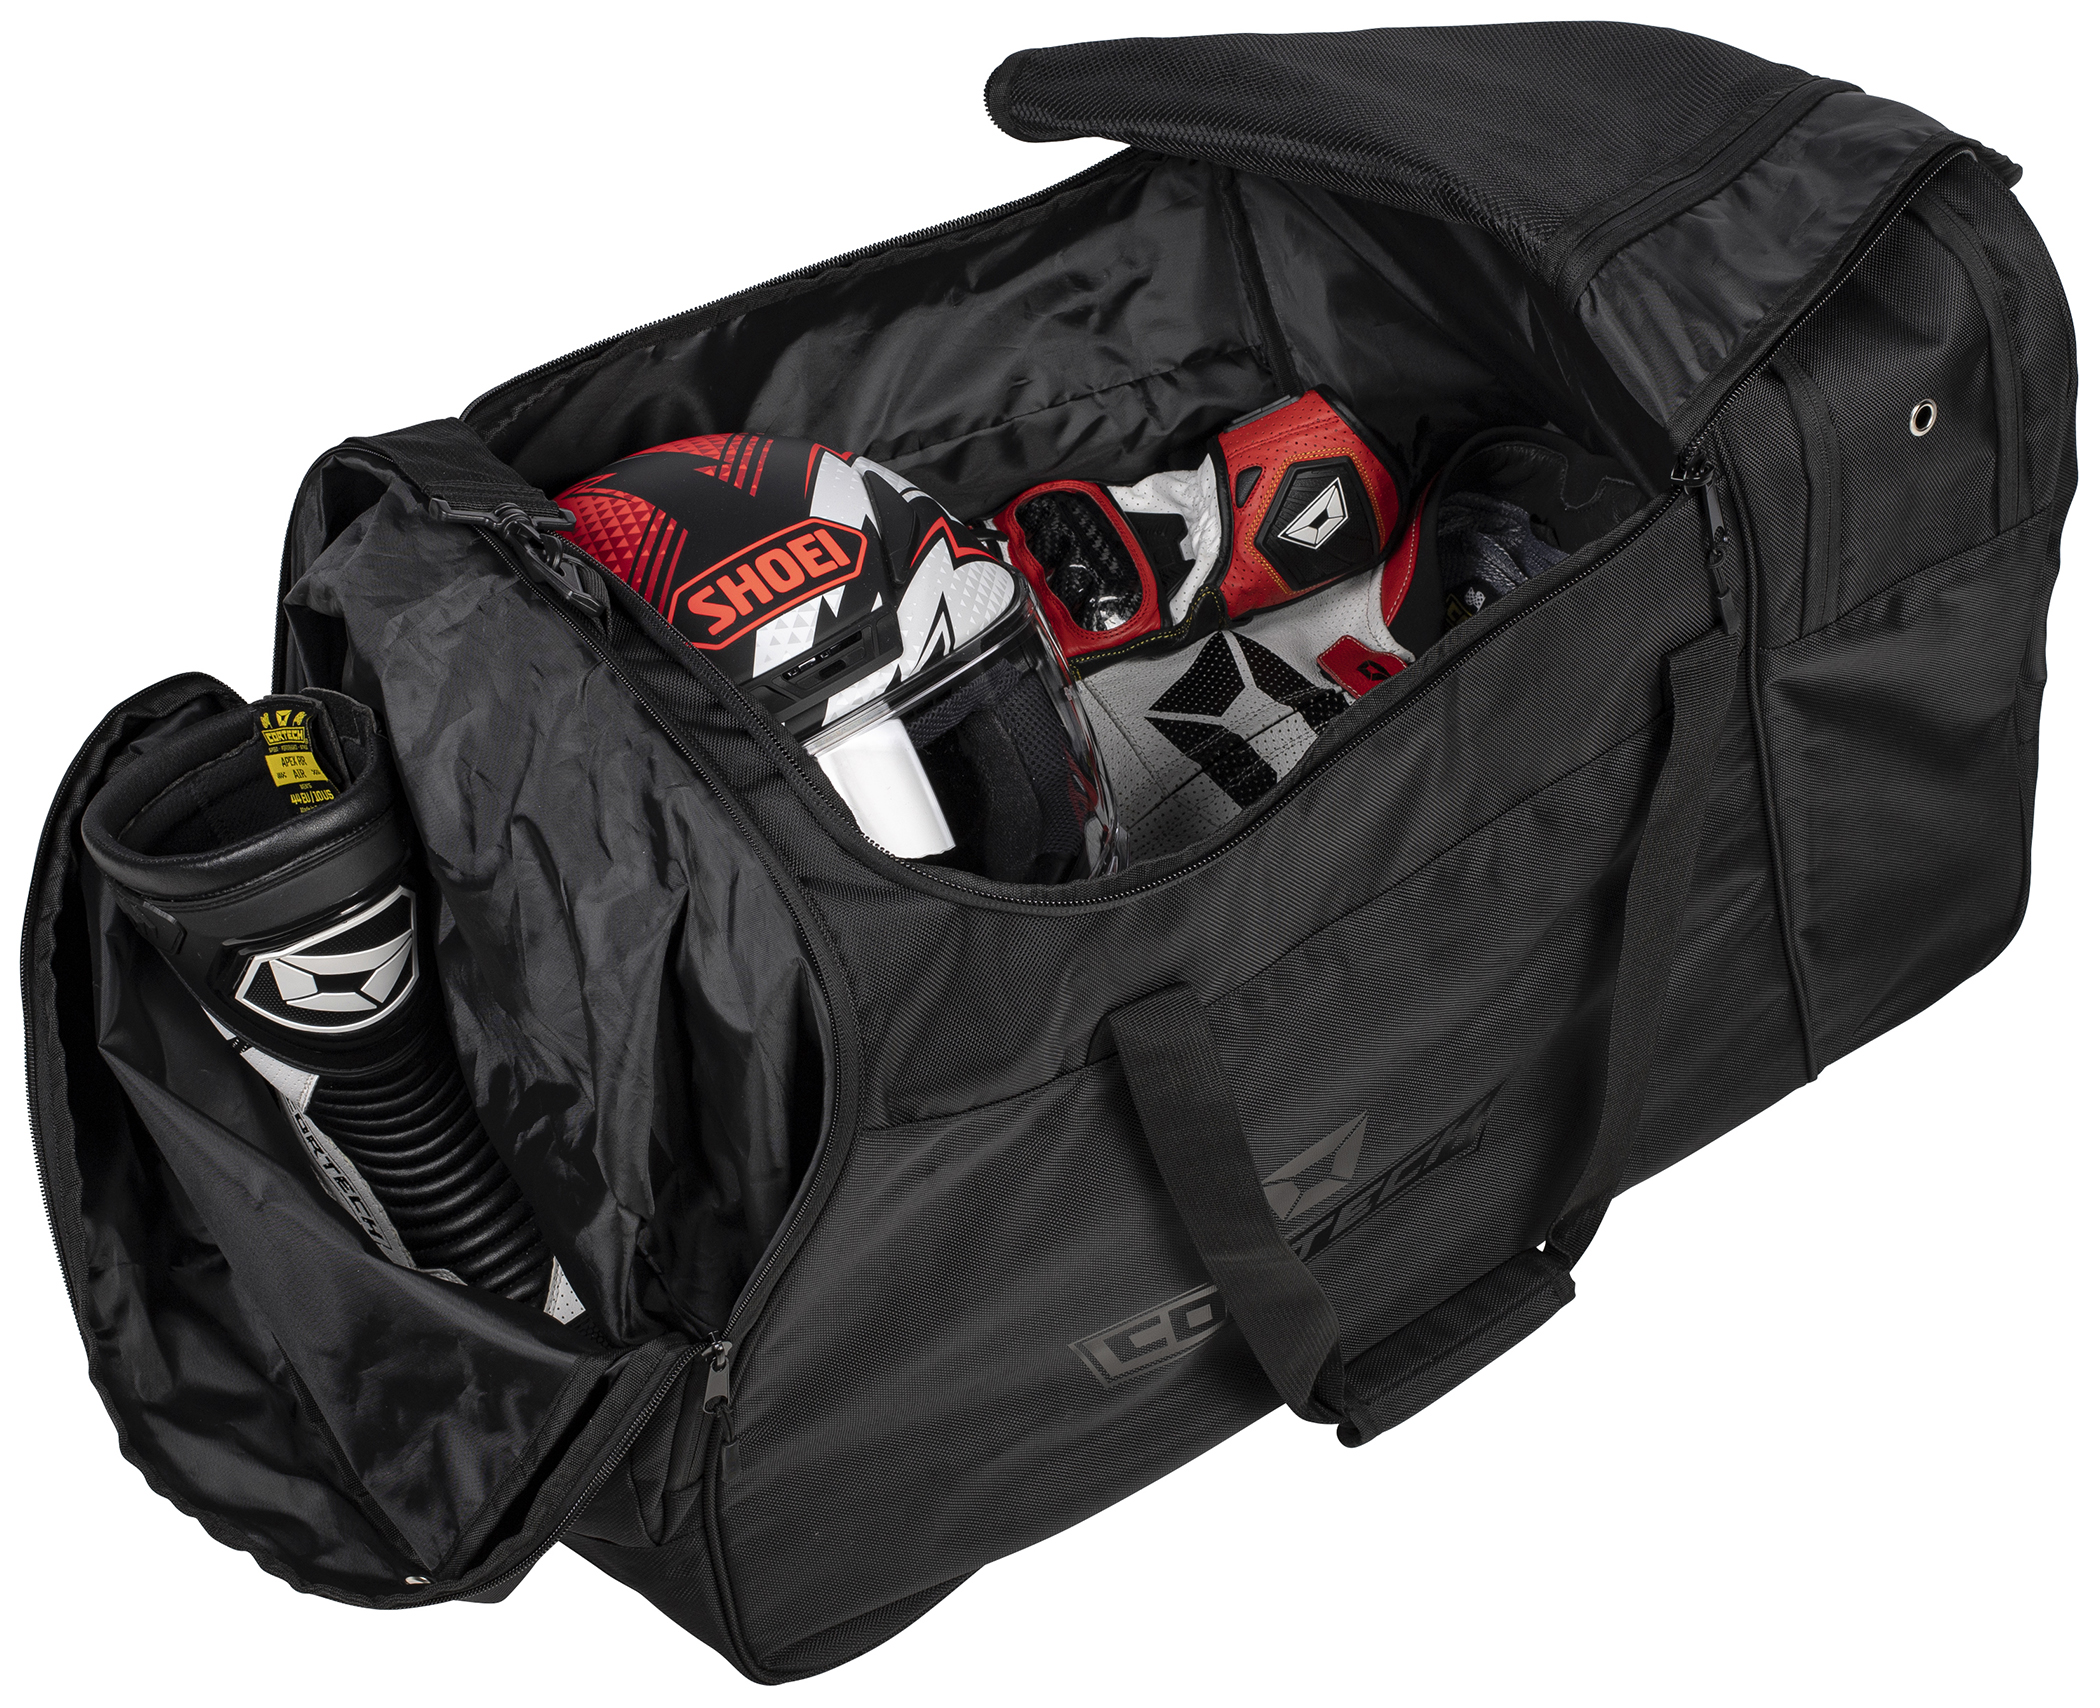 Viewing Images For Cortech Tracker Gear Bag :: MotorcycleGear.com